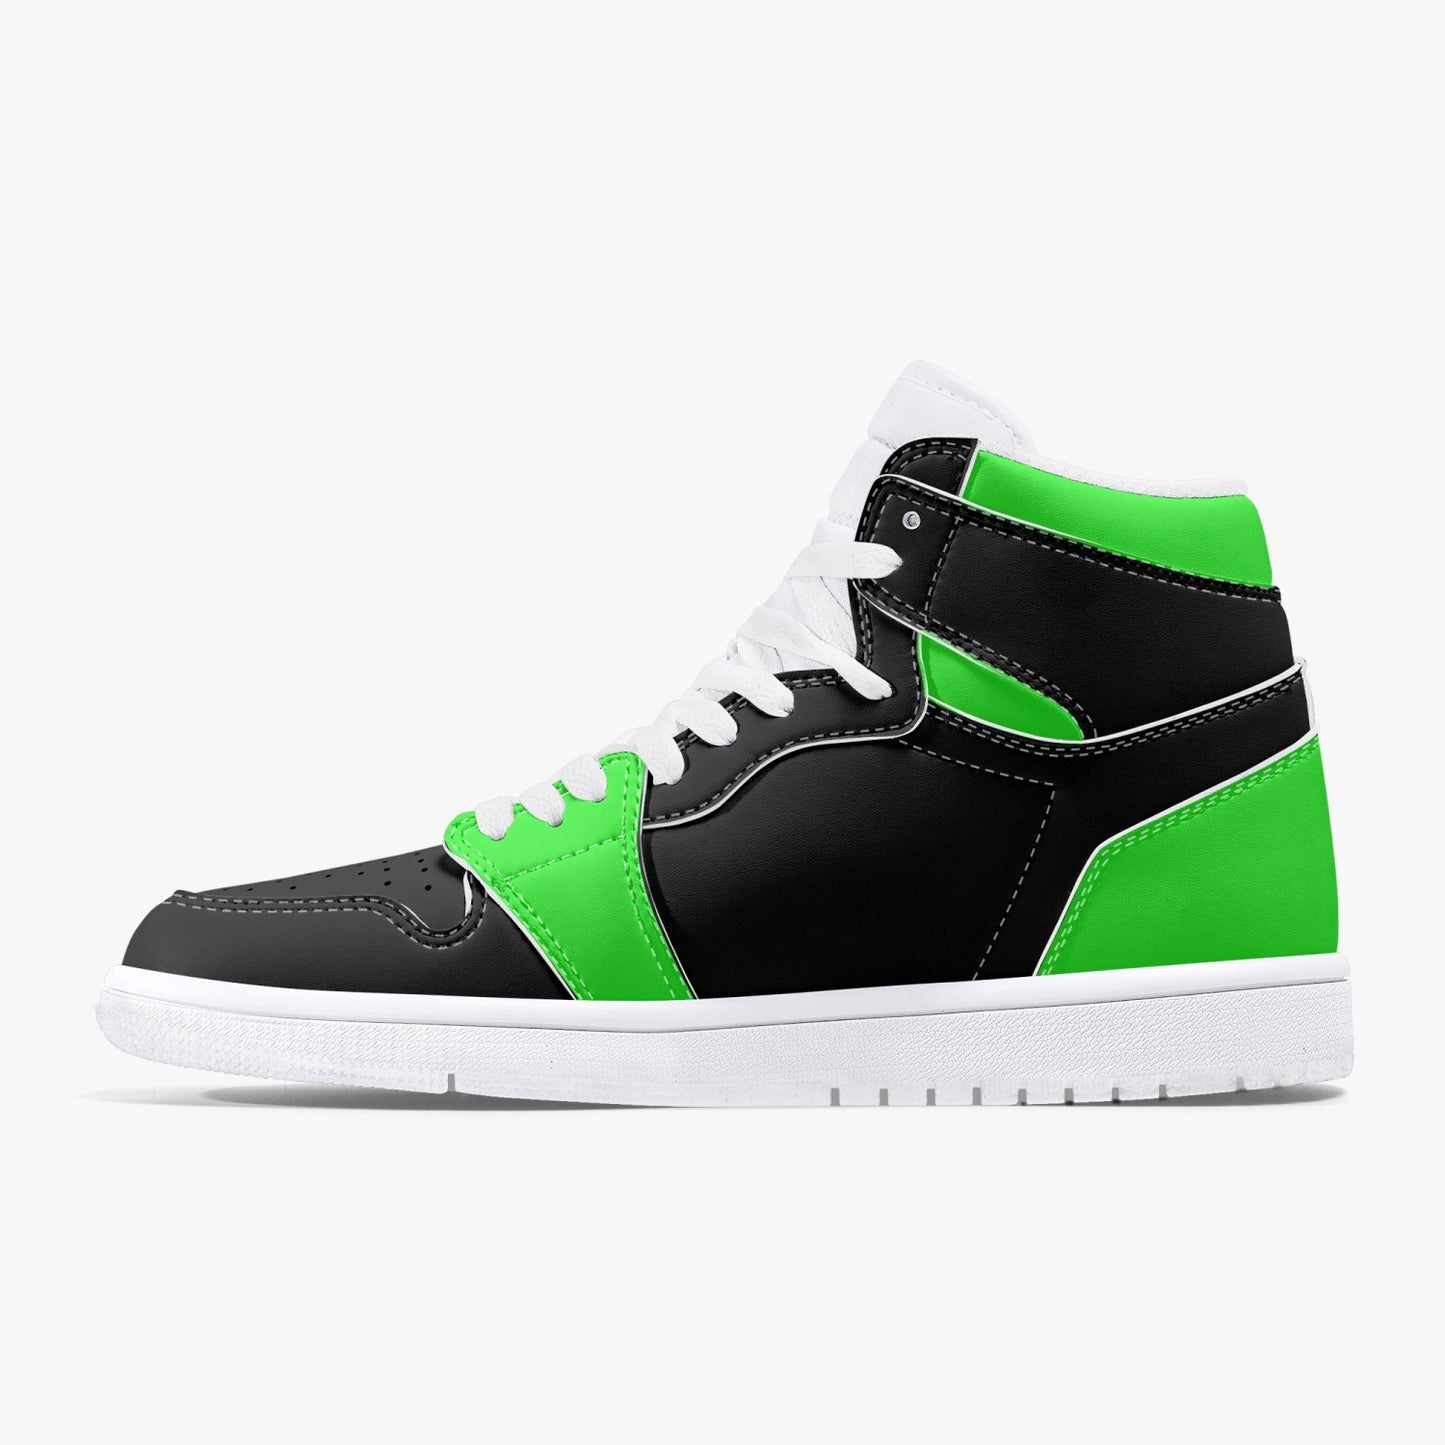 PIT LANE CLOTHING Satelite High-Top Leather Sneakers